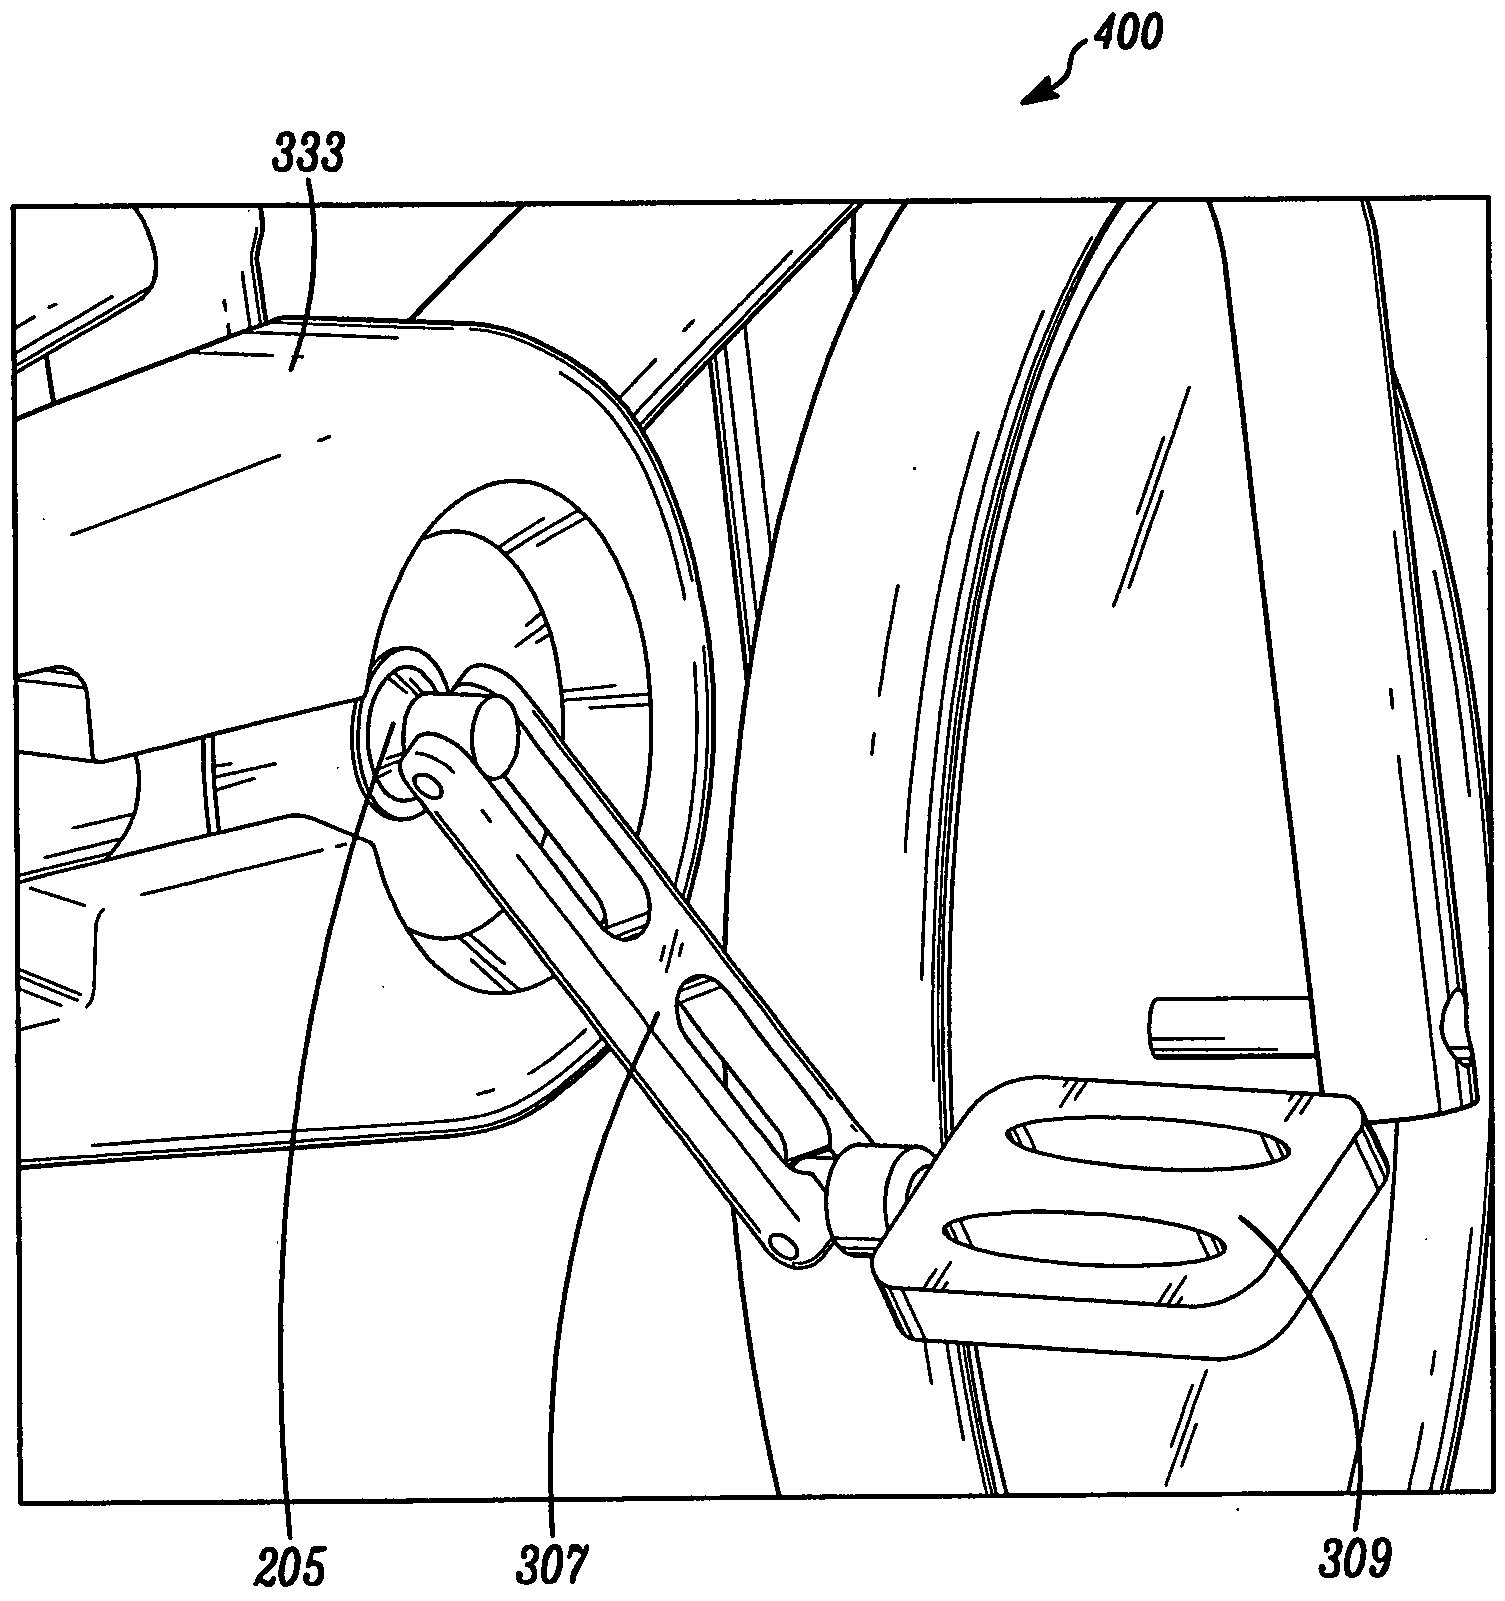 Articulable crankset for converting a pedal-powered vehicle into a push-powered vehicle